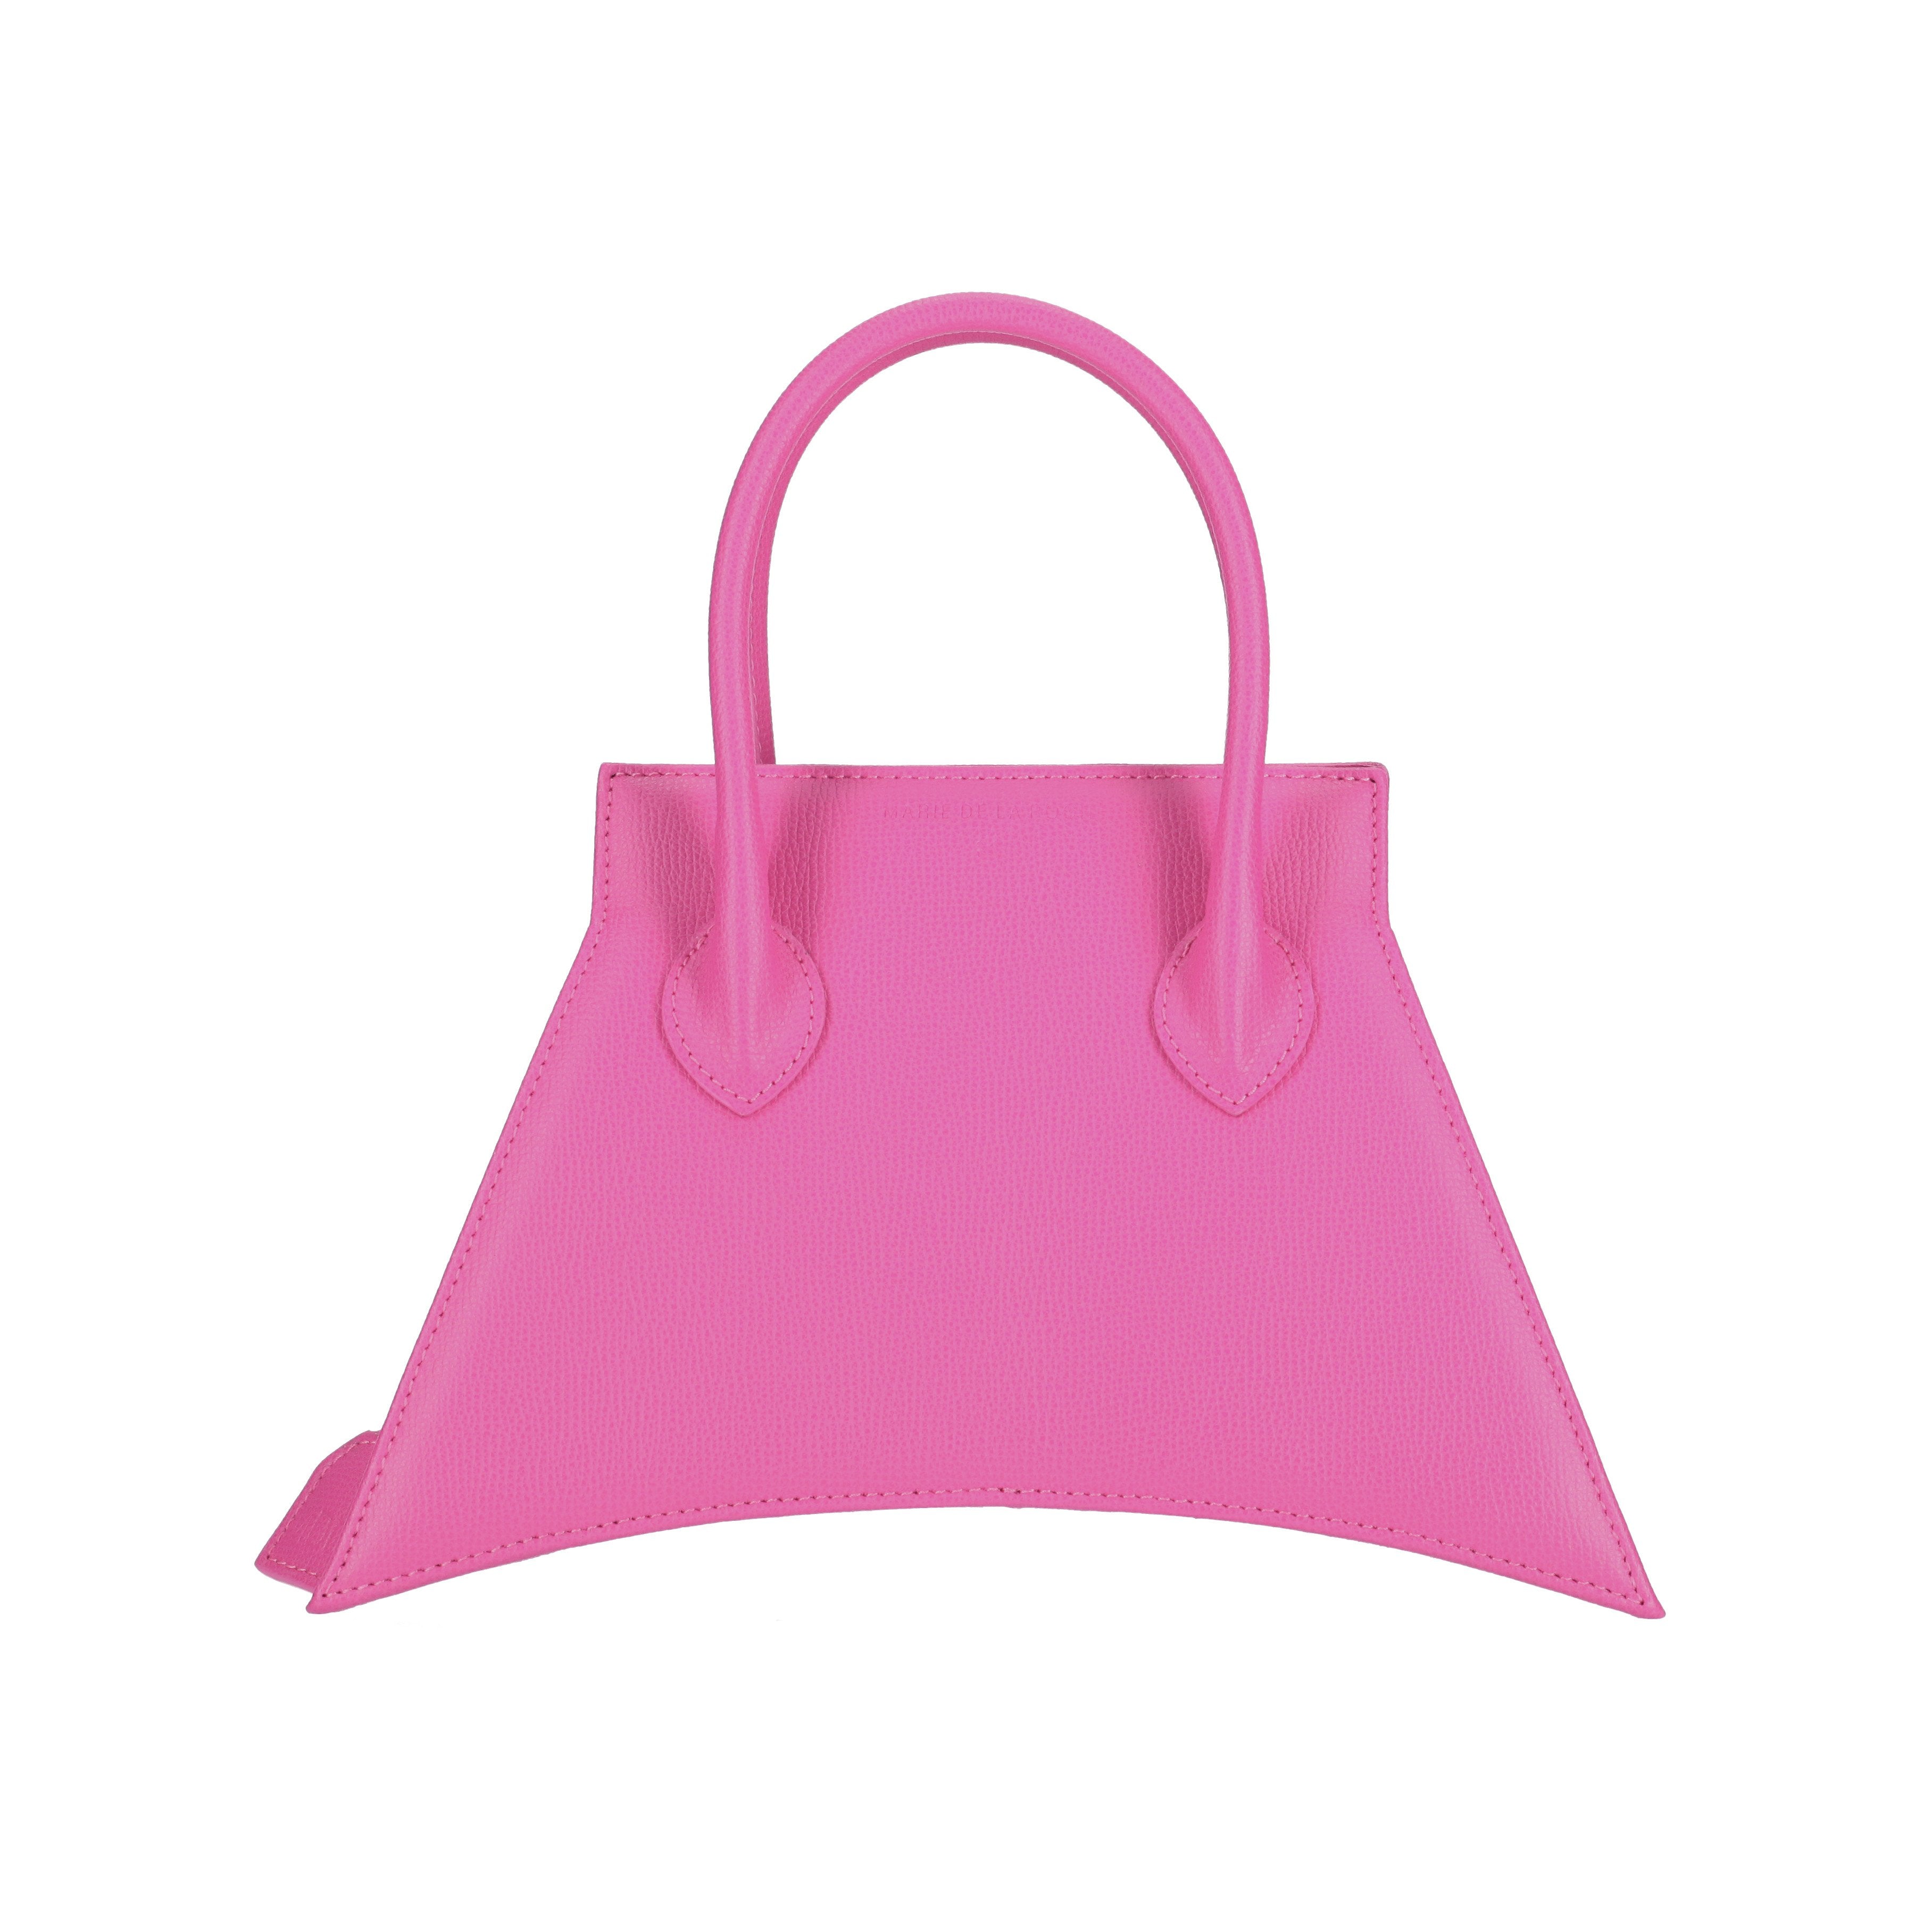 Italians material with fashionable look and feel, MICRO BLANKET PASSION is a micro hot pink bag, small bag with a stunning look from MDLR